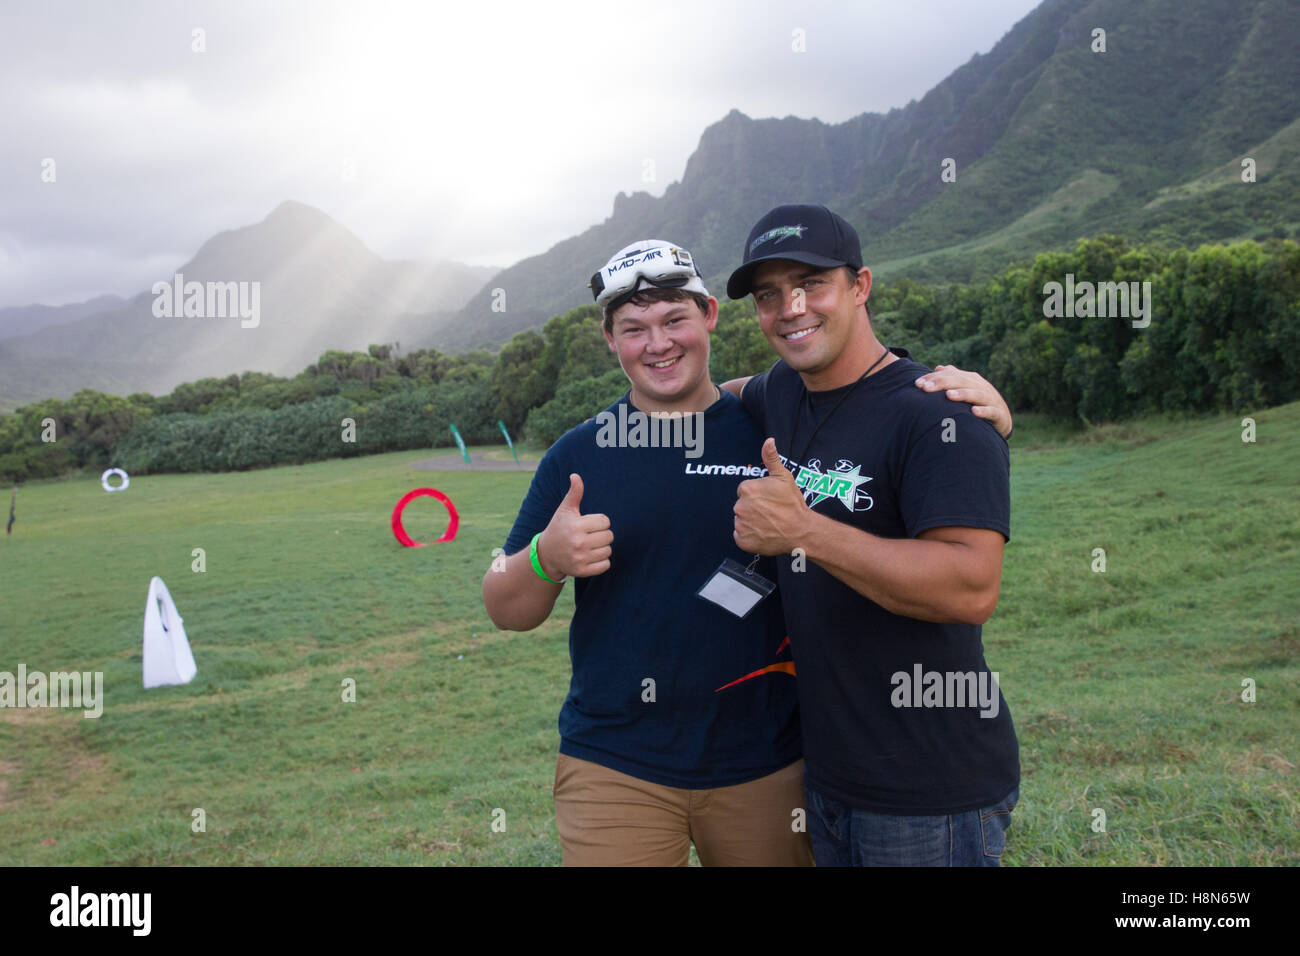 Drone Worlds 2016. Drone racing competition  Held on Koaloa ranch, O'hau island, Hawaii.  Pictured: Shaun Taylor and Cain Madere Stock Photo